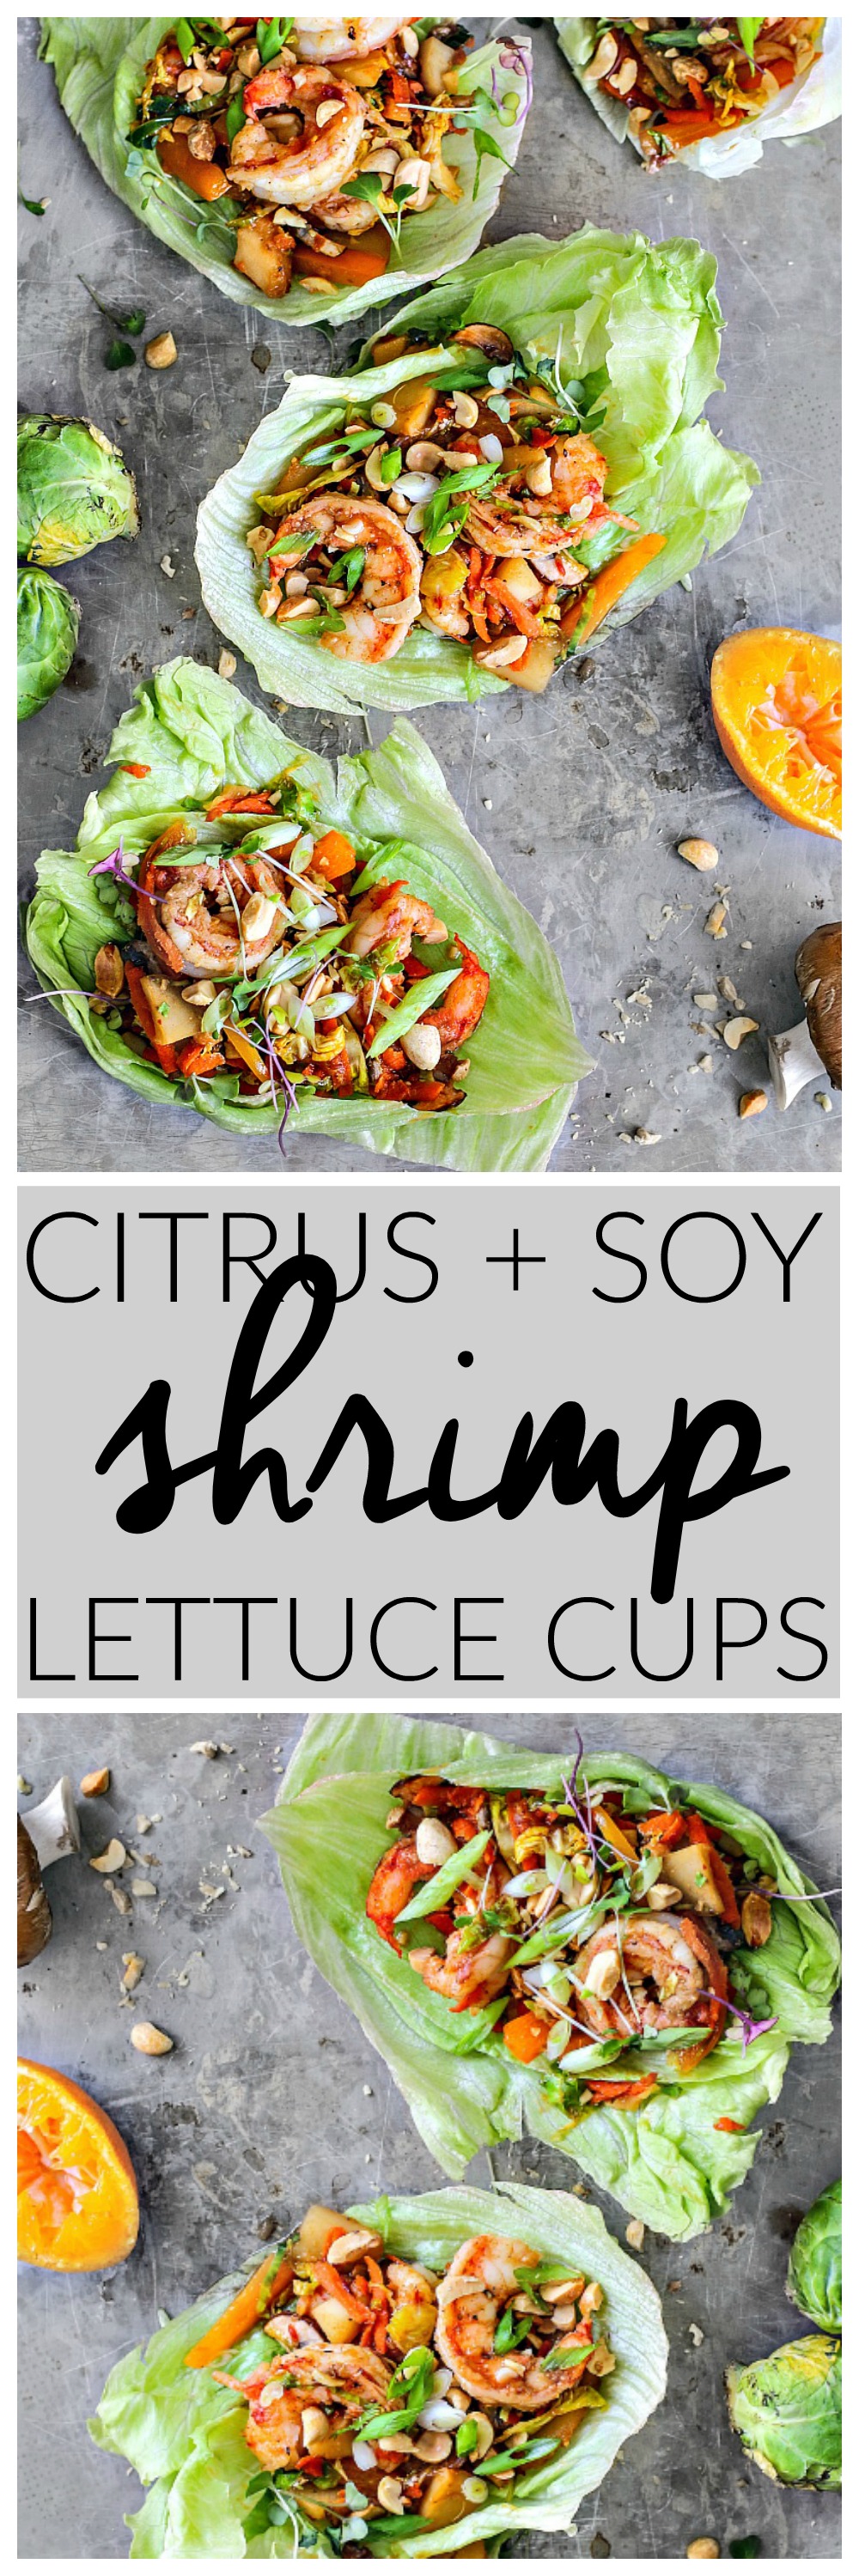 Citrus and Soy Shrimp Lettuce Cups | Killing Thyme